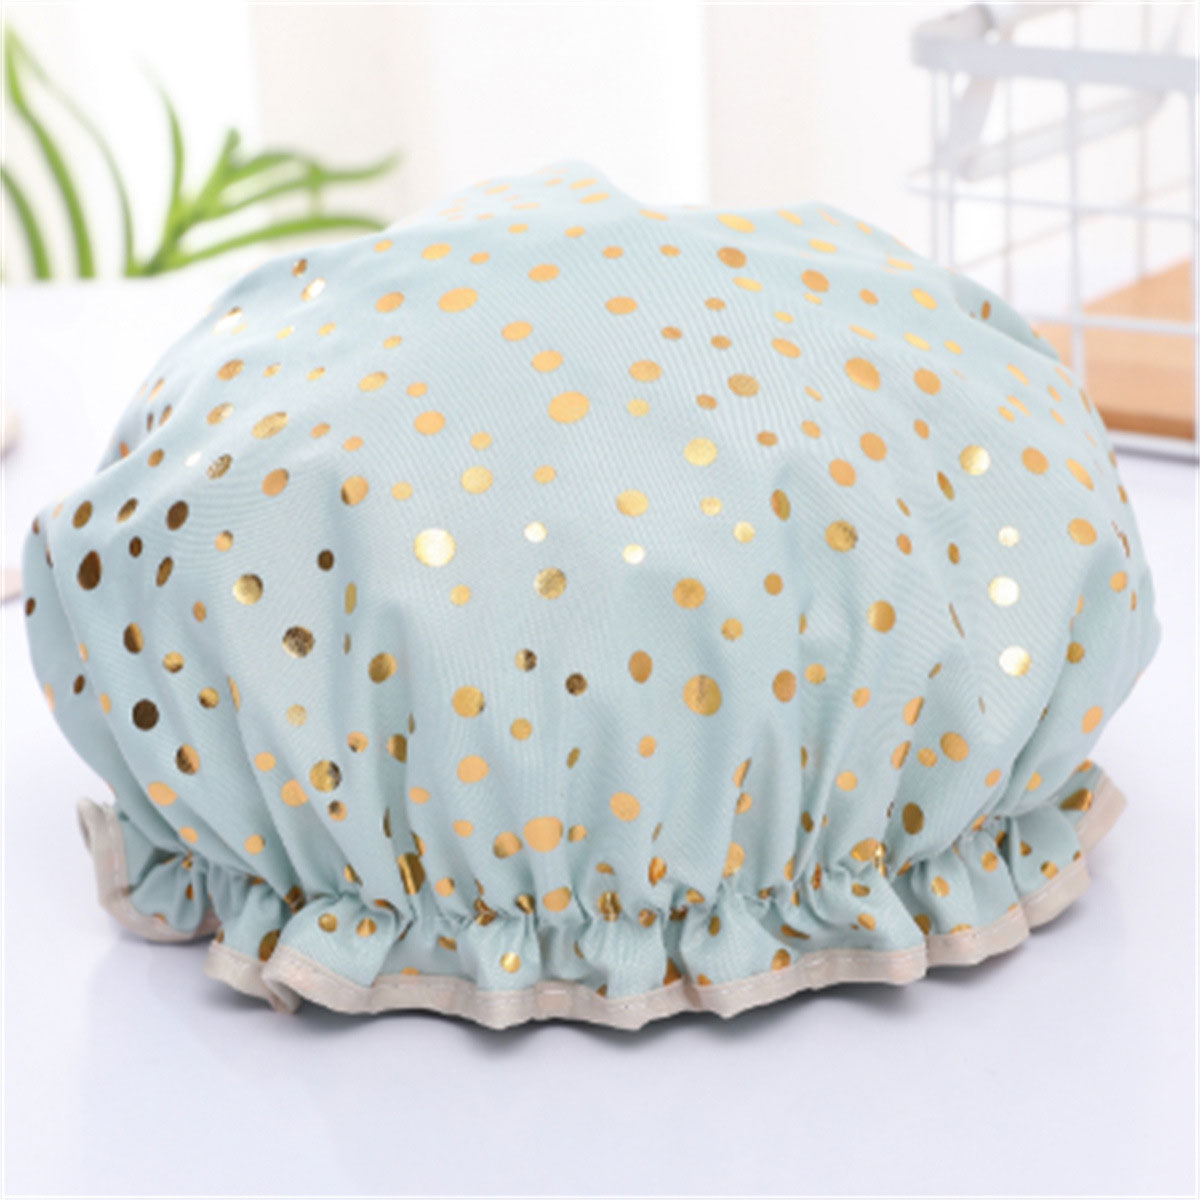 Ladies Hair Cap Hat Supplies Bathroom Double Layer Shower Waterproof Thick Cover Accessories 1pcs 